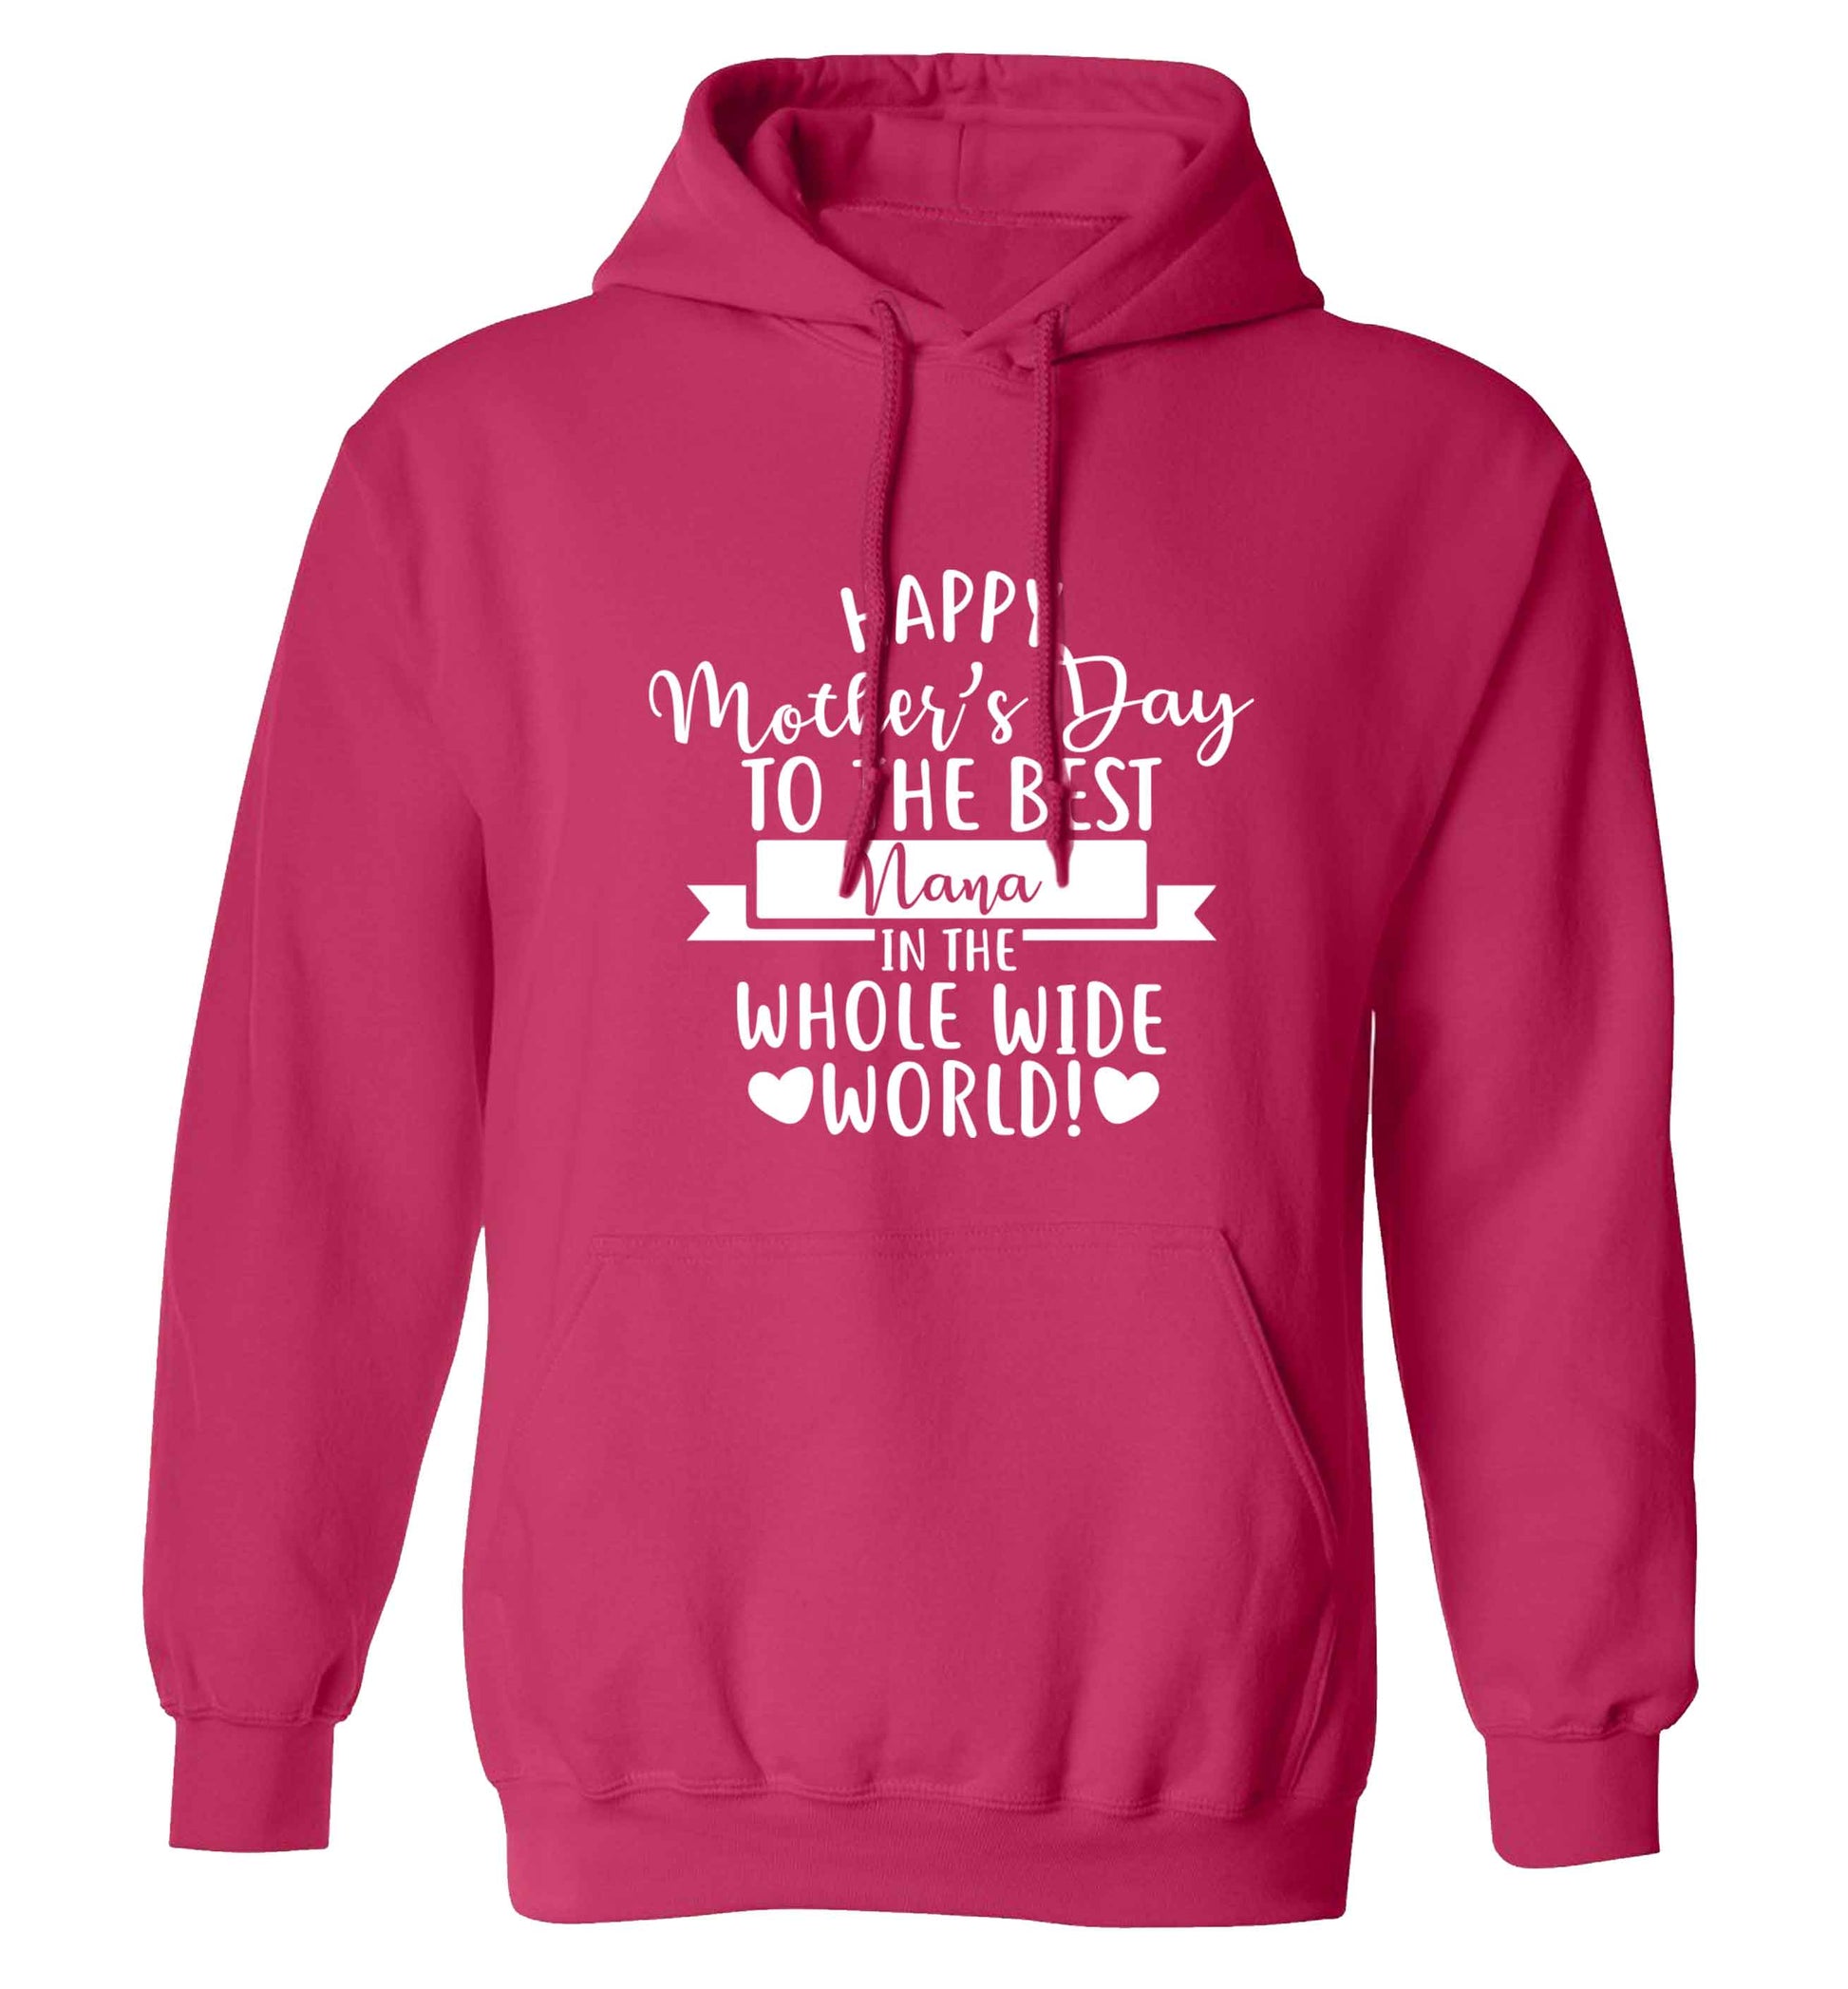 Happy mother's day to the best nana in the world adults unisex pink hoodie 2XL